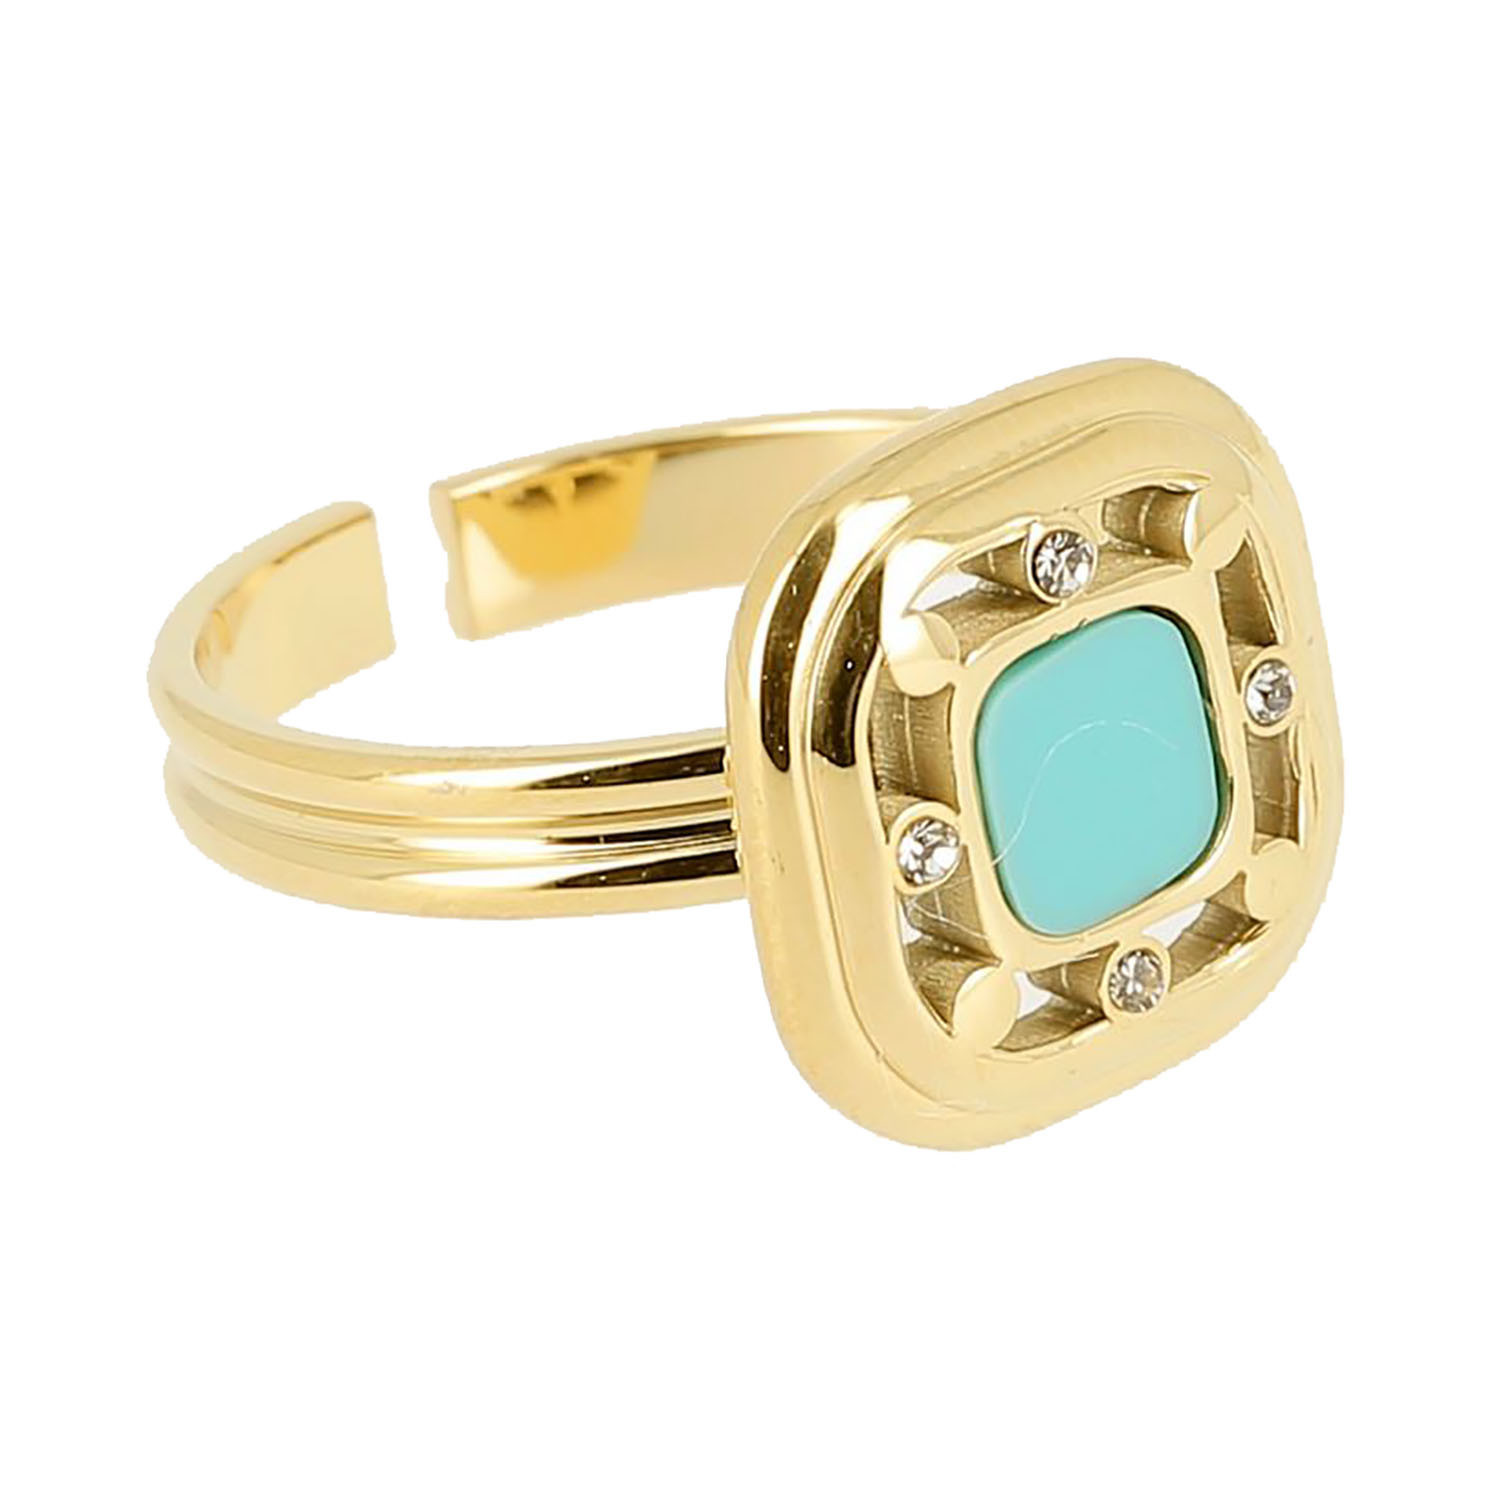 Bague Zag Bijoux Gasby turquoise